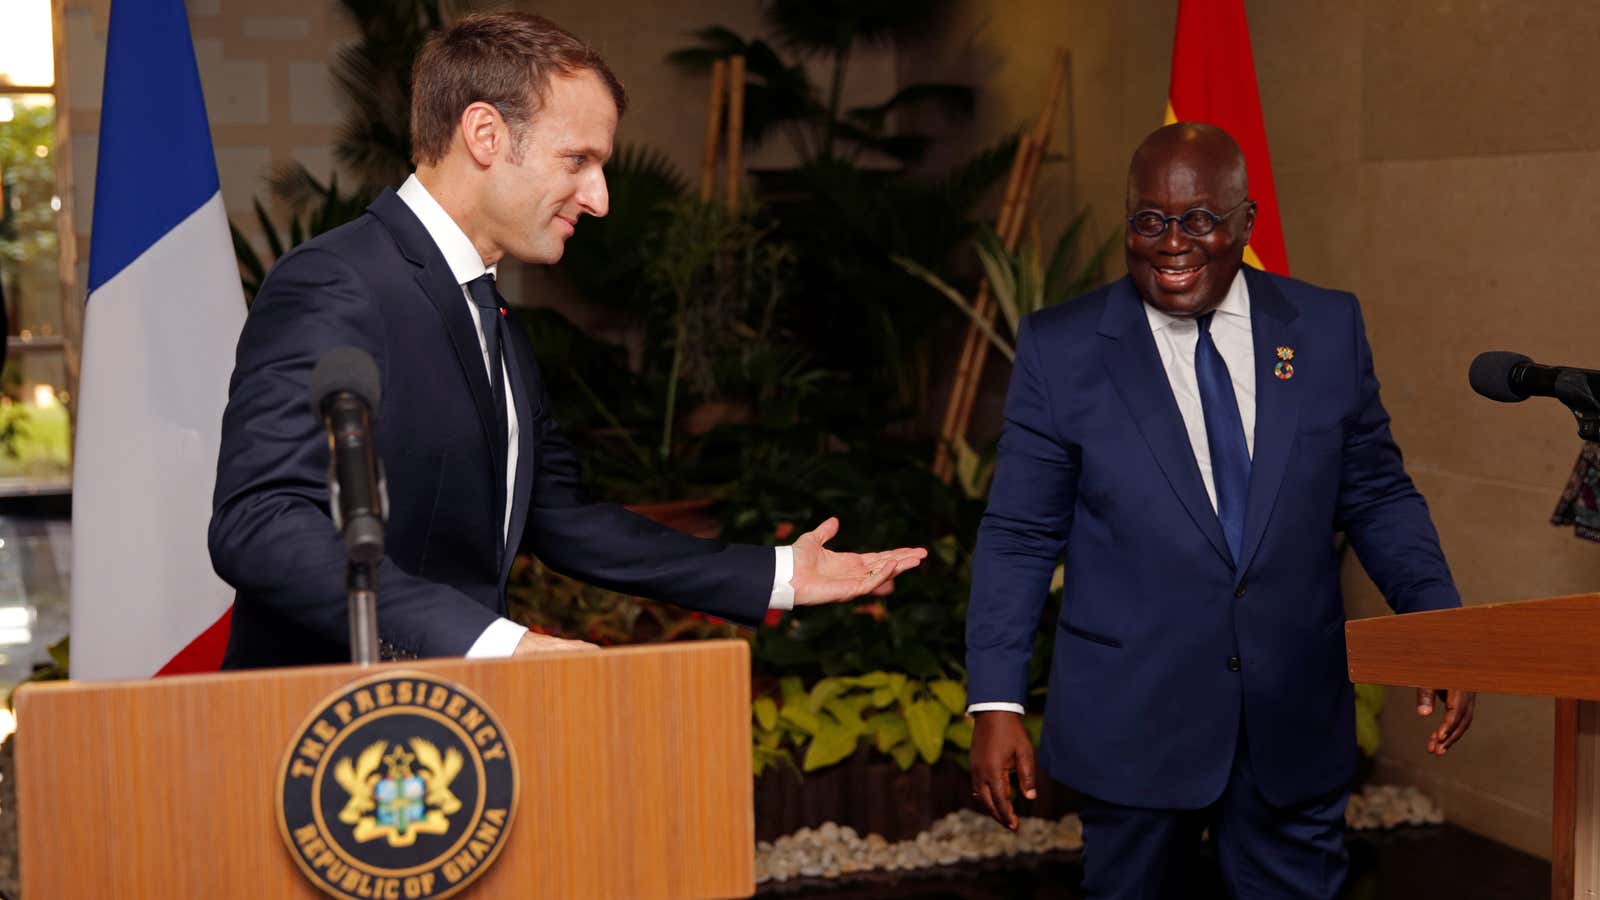 French president Emmanuel Macron with Ghana’s President Nana Akufo-Addo at the Presidential palace in Accra, Ghana.